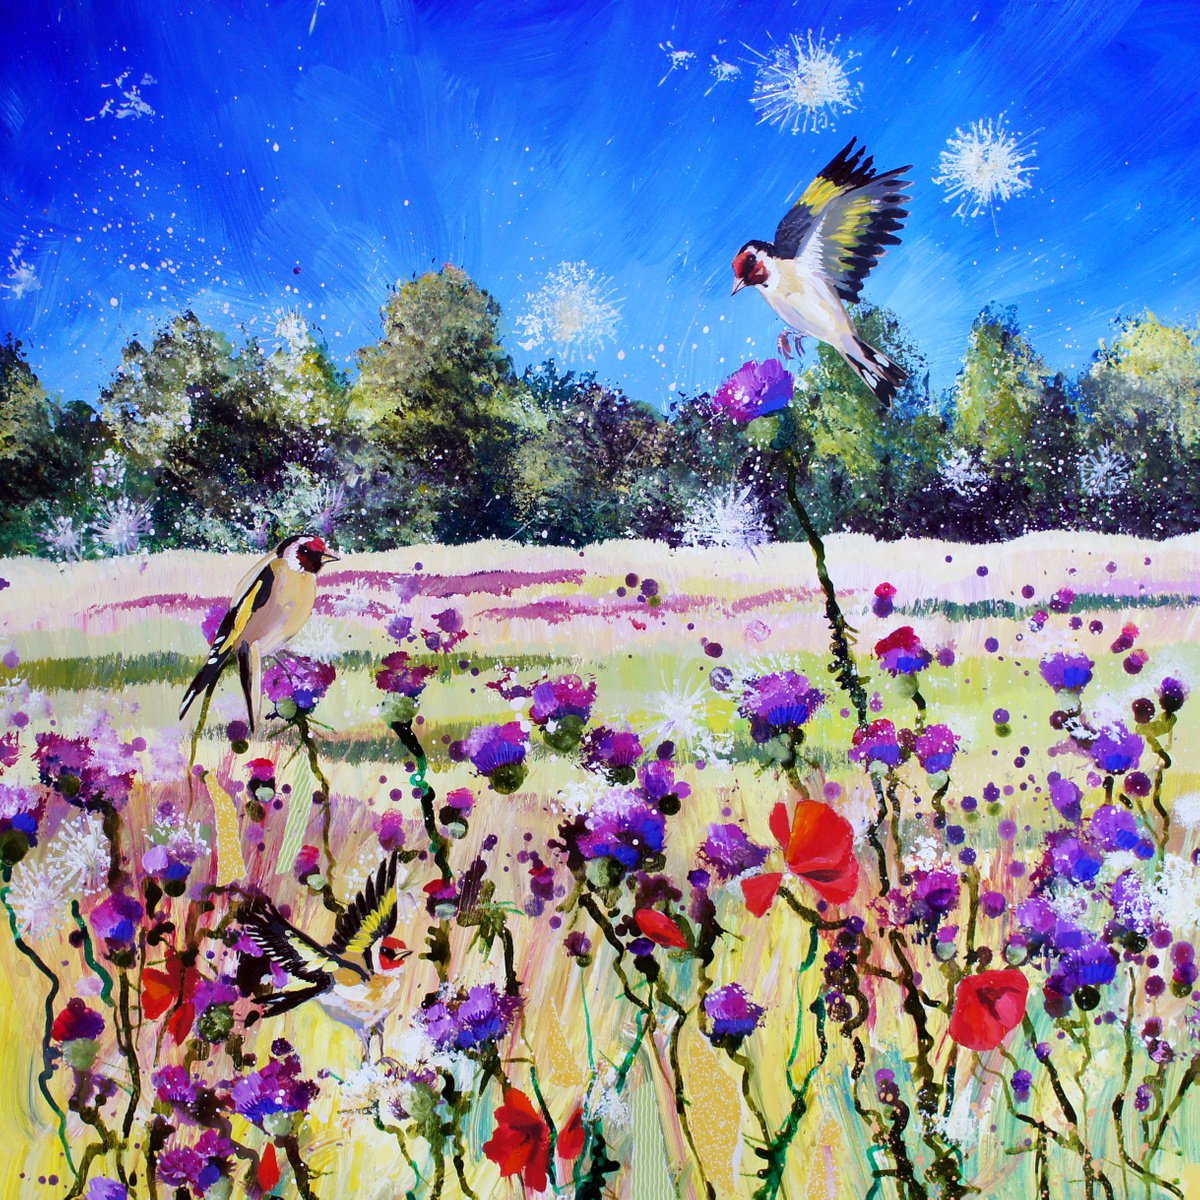 Three Goldfinches - Summer thistles in the Sheep field by Julia Rigby